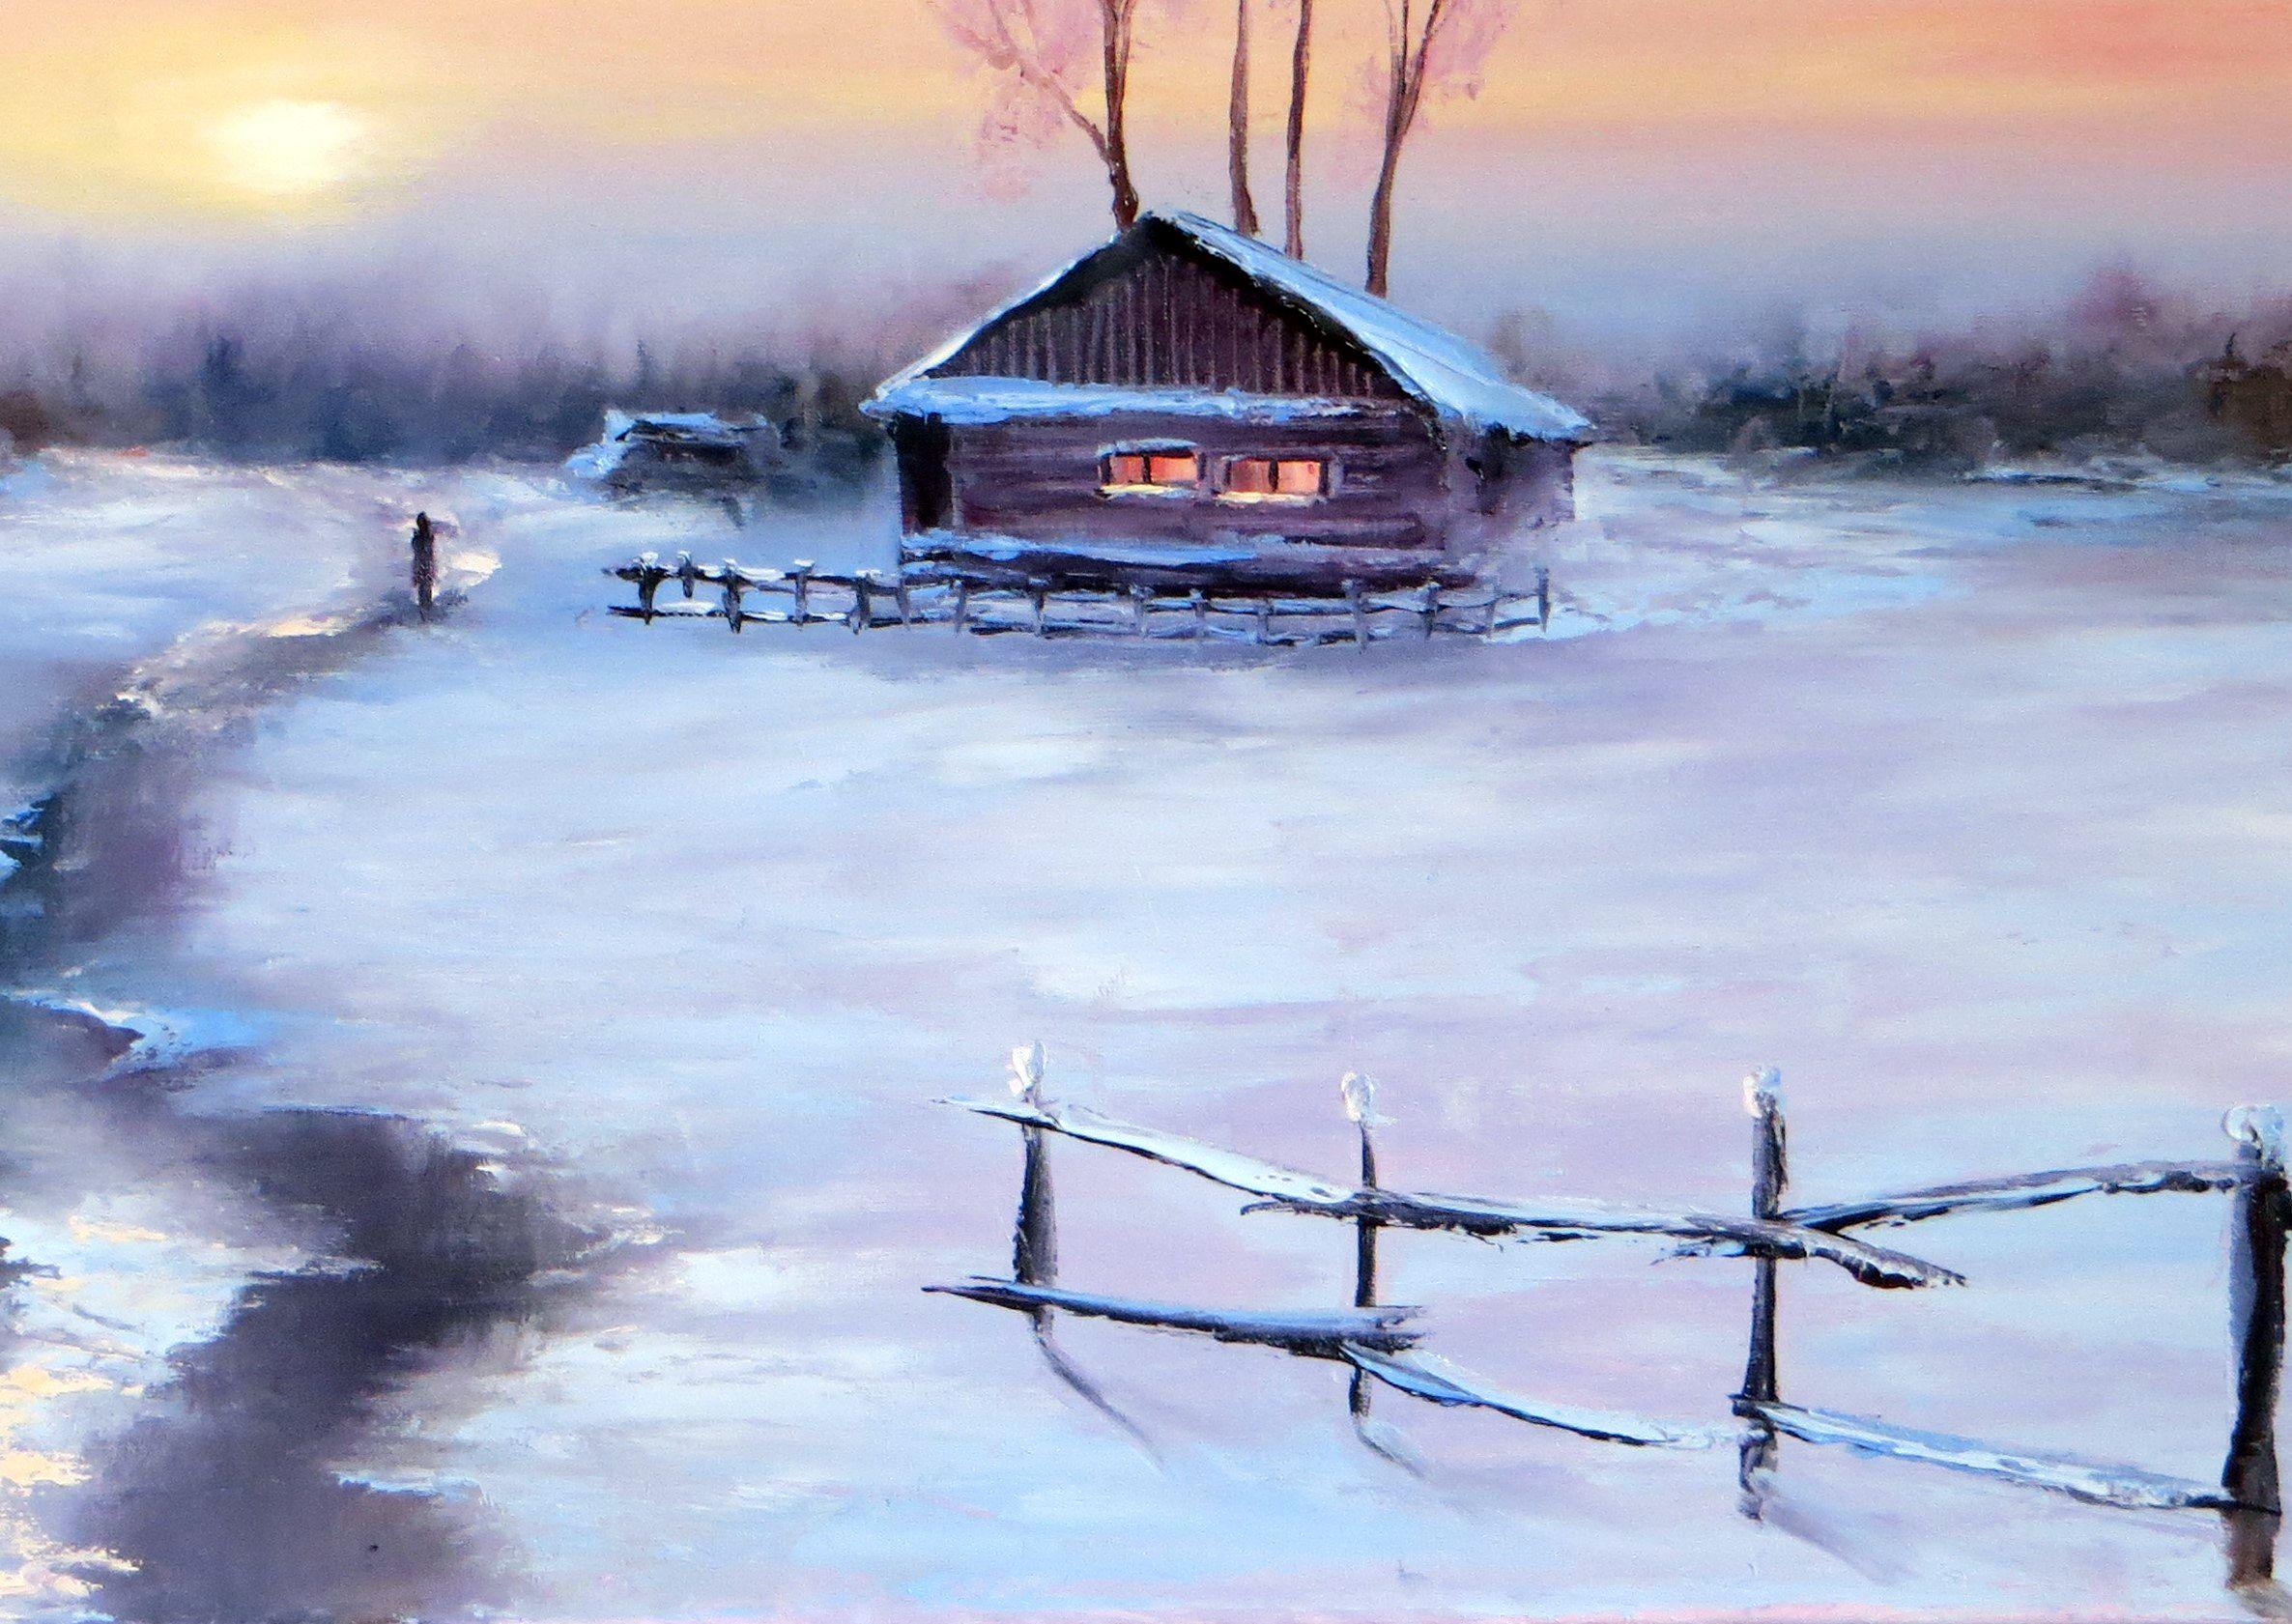 In this tranquil scene, I've immersed my brush in the silent poetry of winter's embrace. Through textured oils and a symphony of muted pastels, I've sought to capture the hushed whisper of snow-blanketed solitude—where warm light spills from a